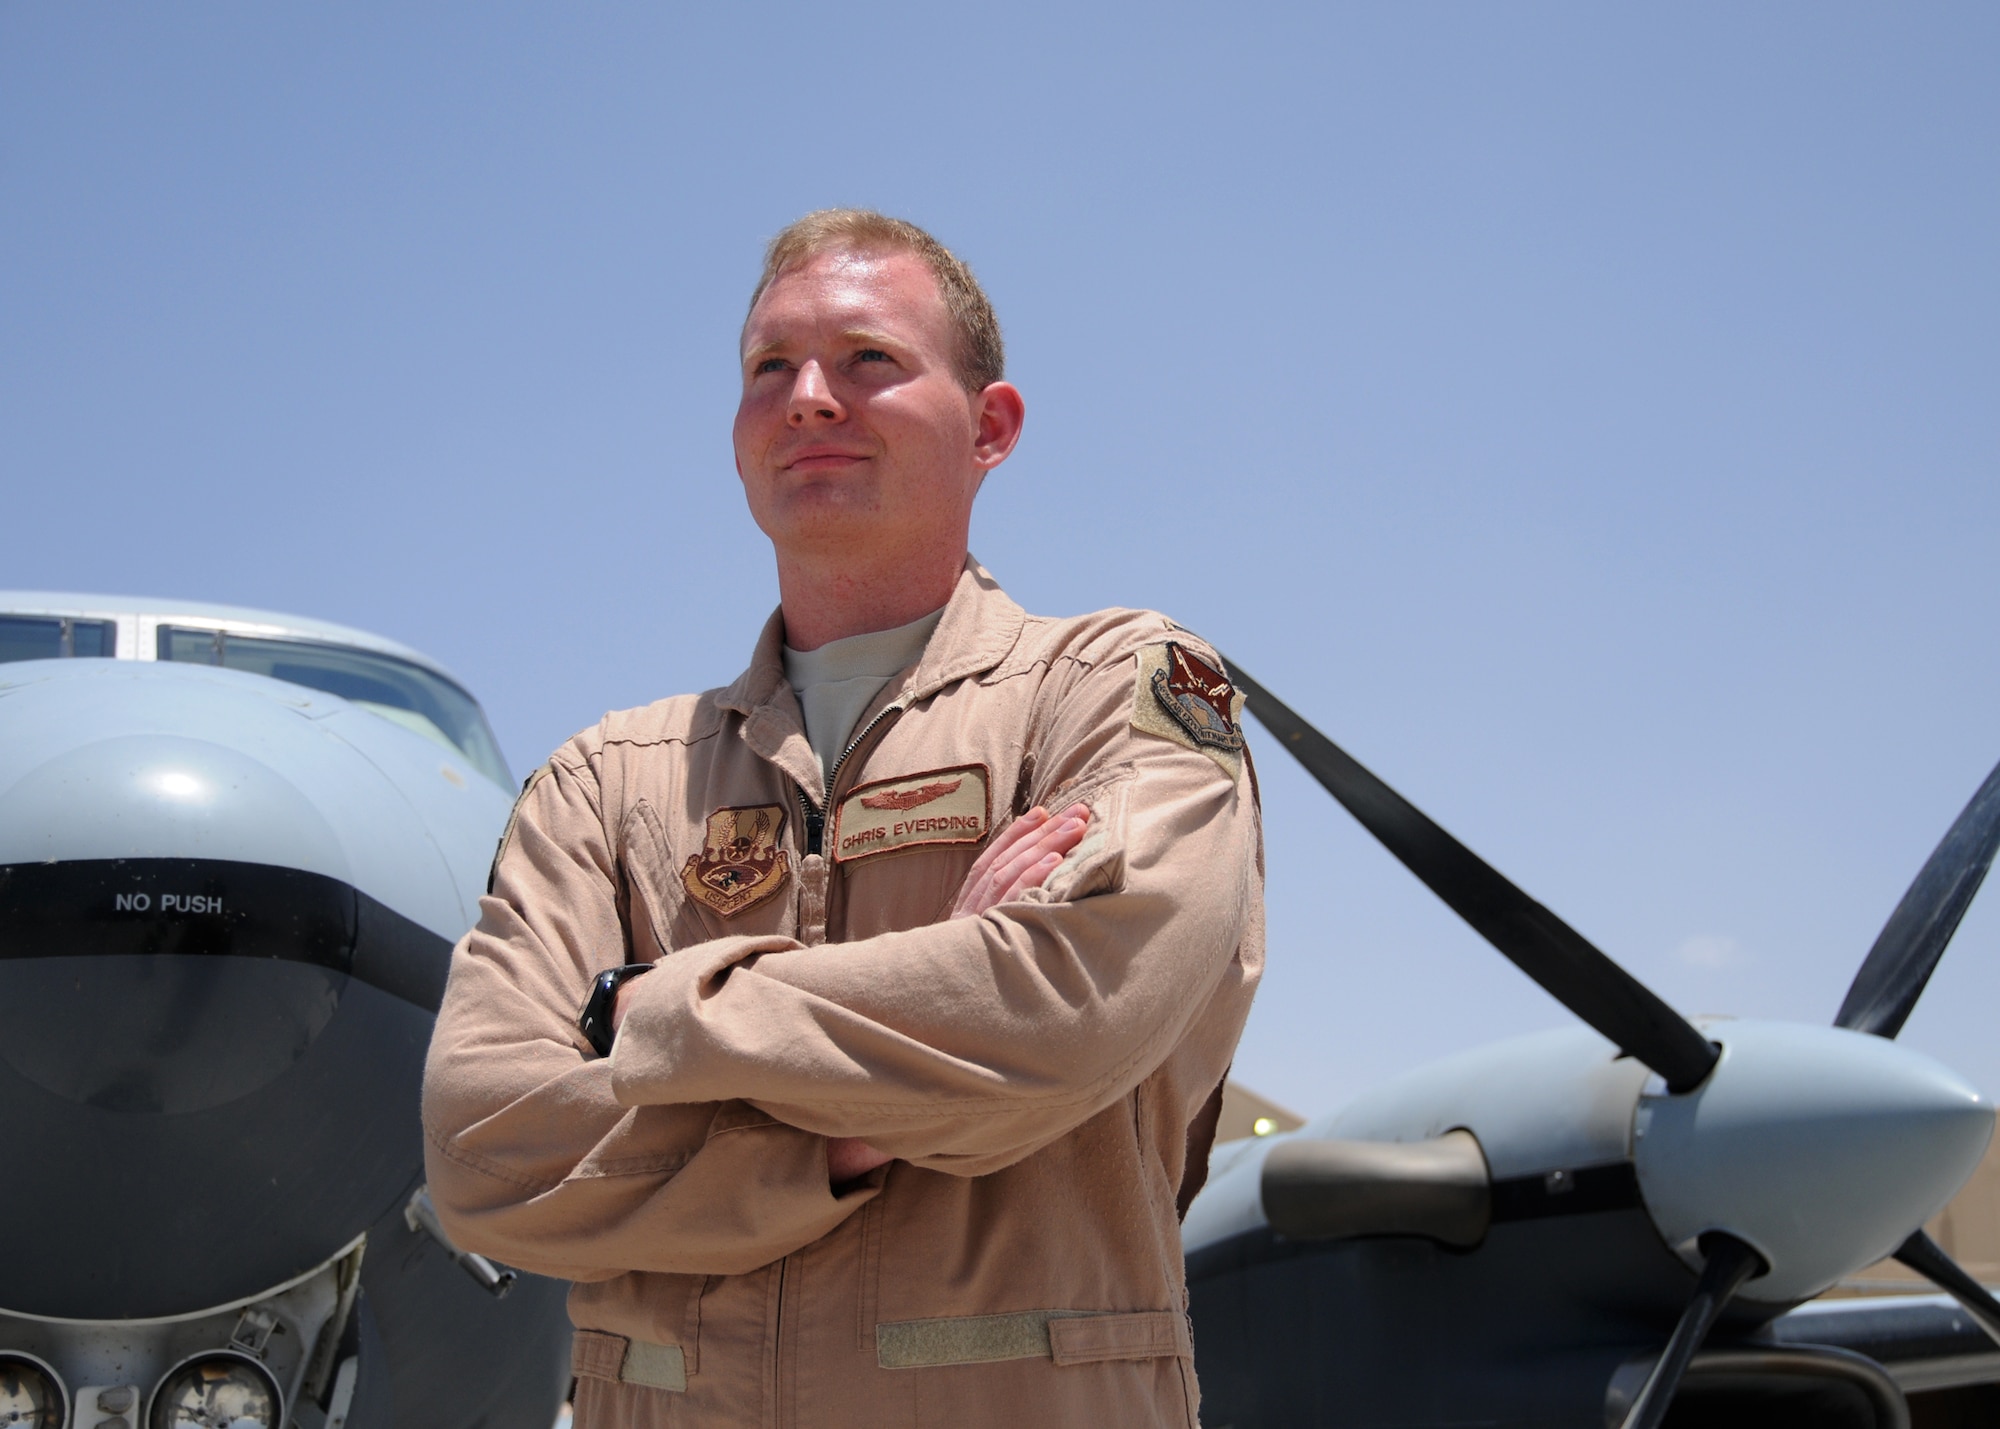 2nd. Lt. Christopher Everding, a 361st Expeditionary Reconnaissance Squadron MC-12W pilot, stands in front of the airplane he's about fly for a mission here at Kandahar Airfield, Afghanistan, June 8, 2012. Everding was recently awarded an Air Medal for flying more than 20 combat sorties in the area of responsibility. The MC-12W, a twin engine low to medium altitude aircraft, is mainly used for  intelligence, surveillance and reconaissance missions throughout the AOR. (U.S. Air Force photo/Staff Sgt. Heather Skinkle)